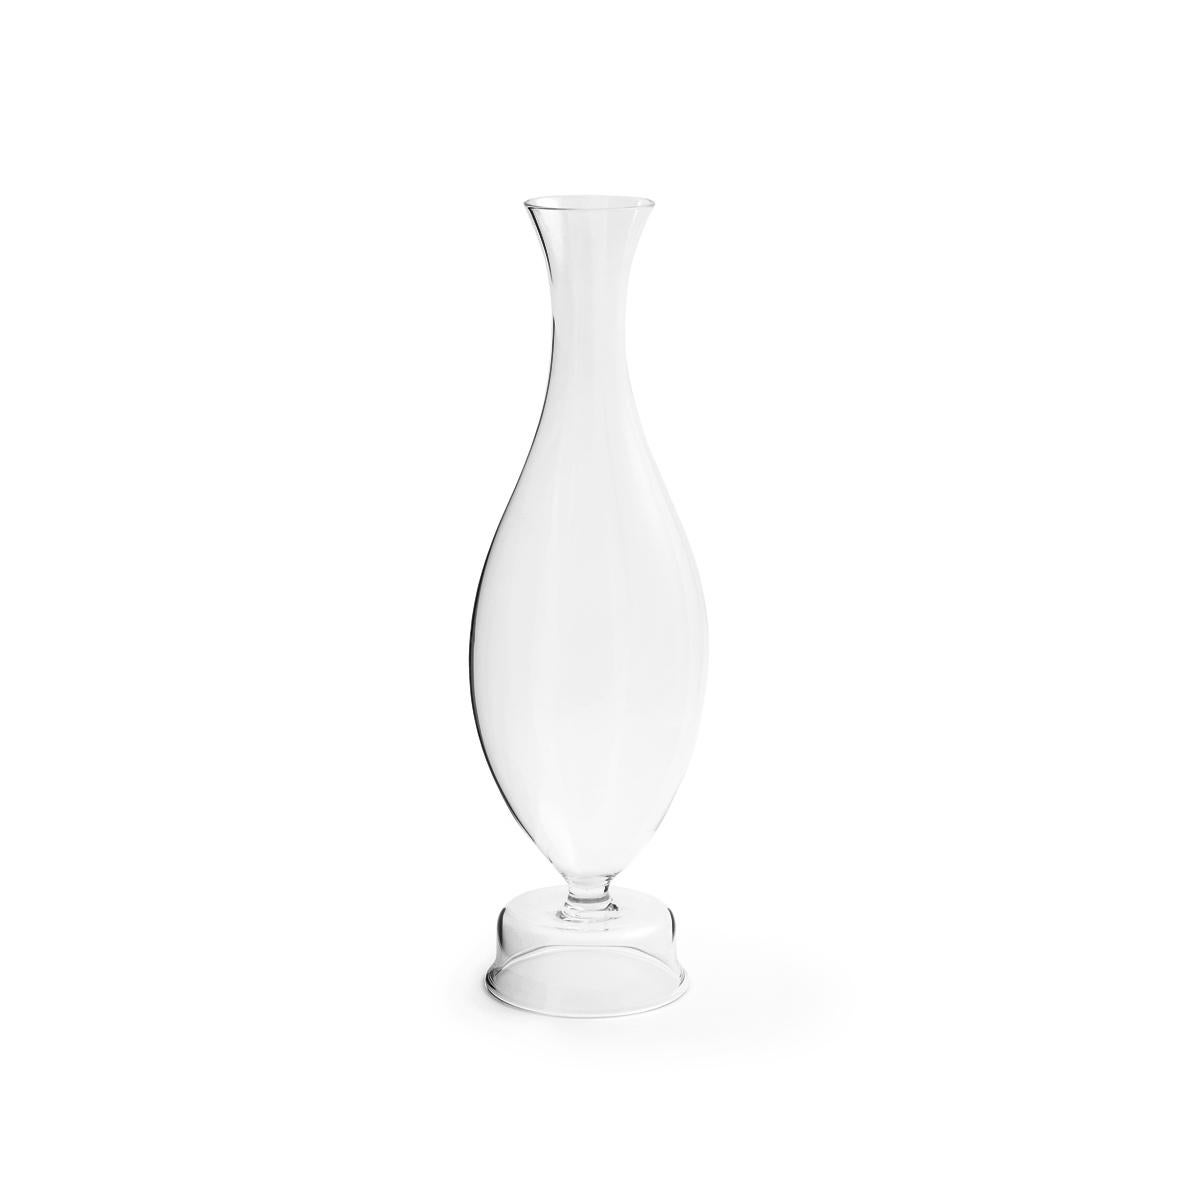 Pims is a mouth blown borosilicate glass bottle with a slim shape, a little masterpiece where the Paola C.’s craftsmen ability meets the design by Aldo Cibic. Pims reminds the glass objects which appear in the still life painting, however it is not